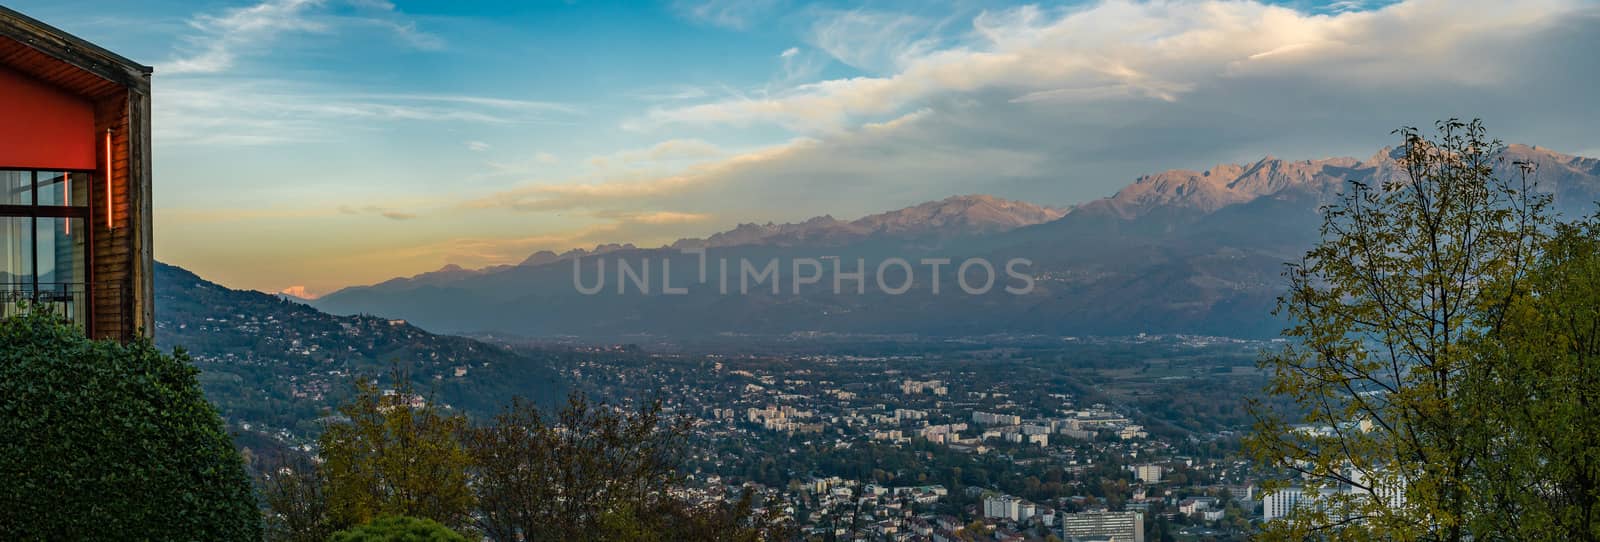 Panorama from La Bastille in Grenoble with Mont-Blanc mountain in the background